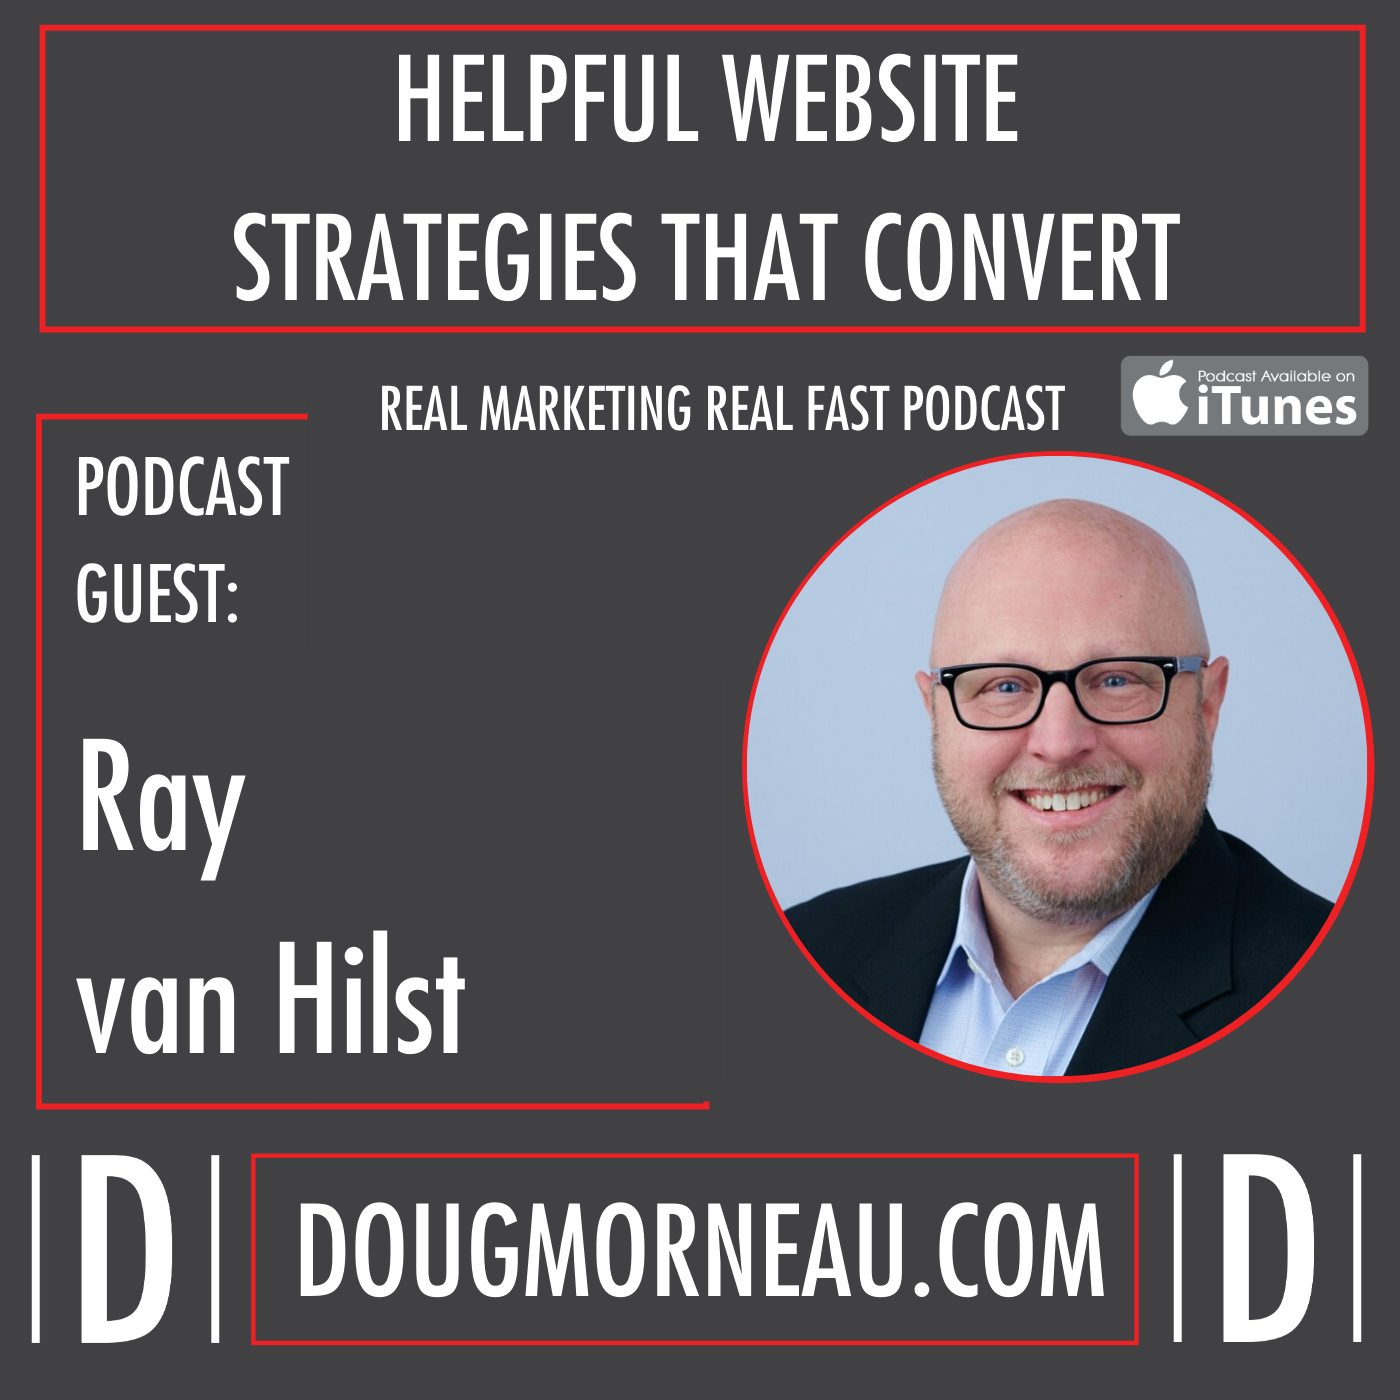 RAY VAN HILST - HELPFUL WEBSITE STRATEGIES THAT CONVERT - HOW TO IMPROVE YOUR GOOGLE RANKS IN 2020 - DOUG MORNEAU - REAL MARKETING REAL FAST PODCAST